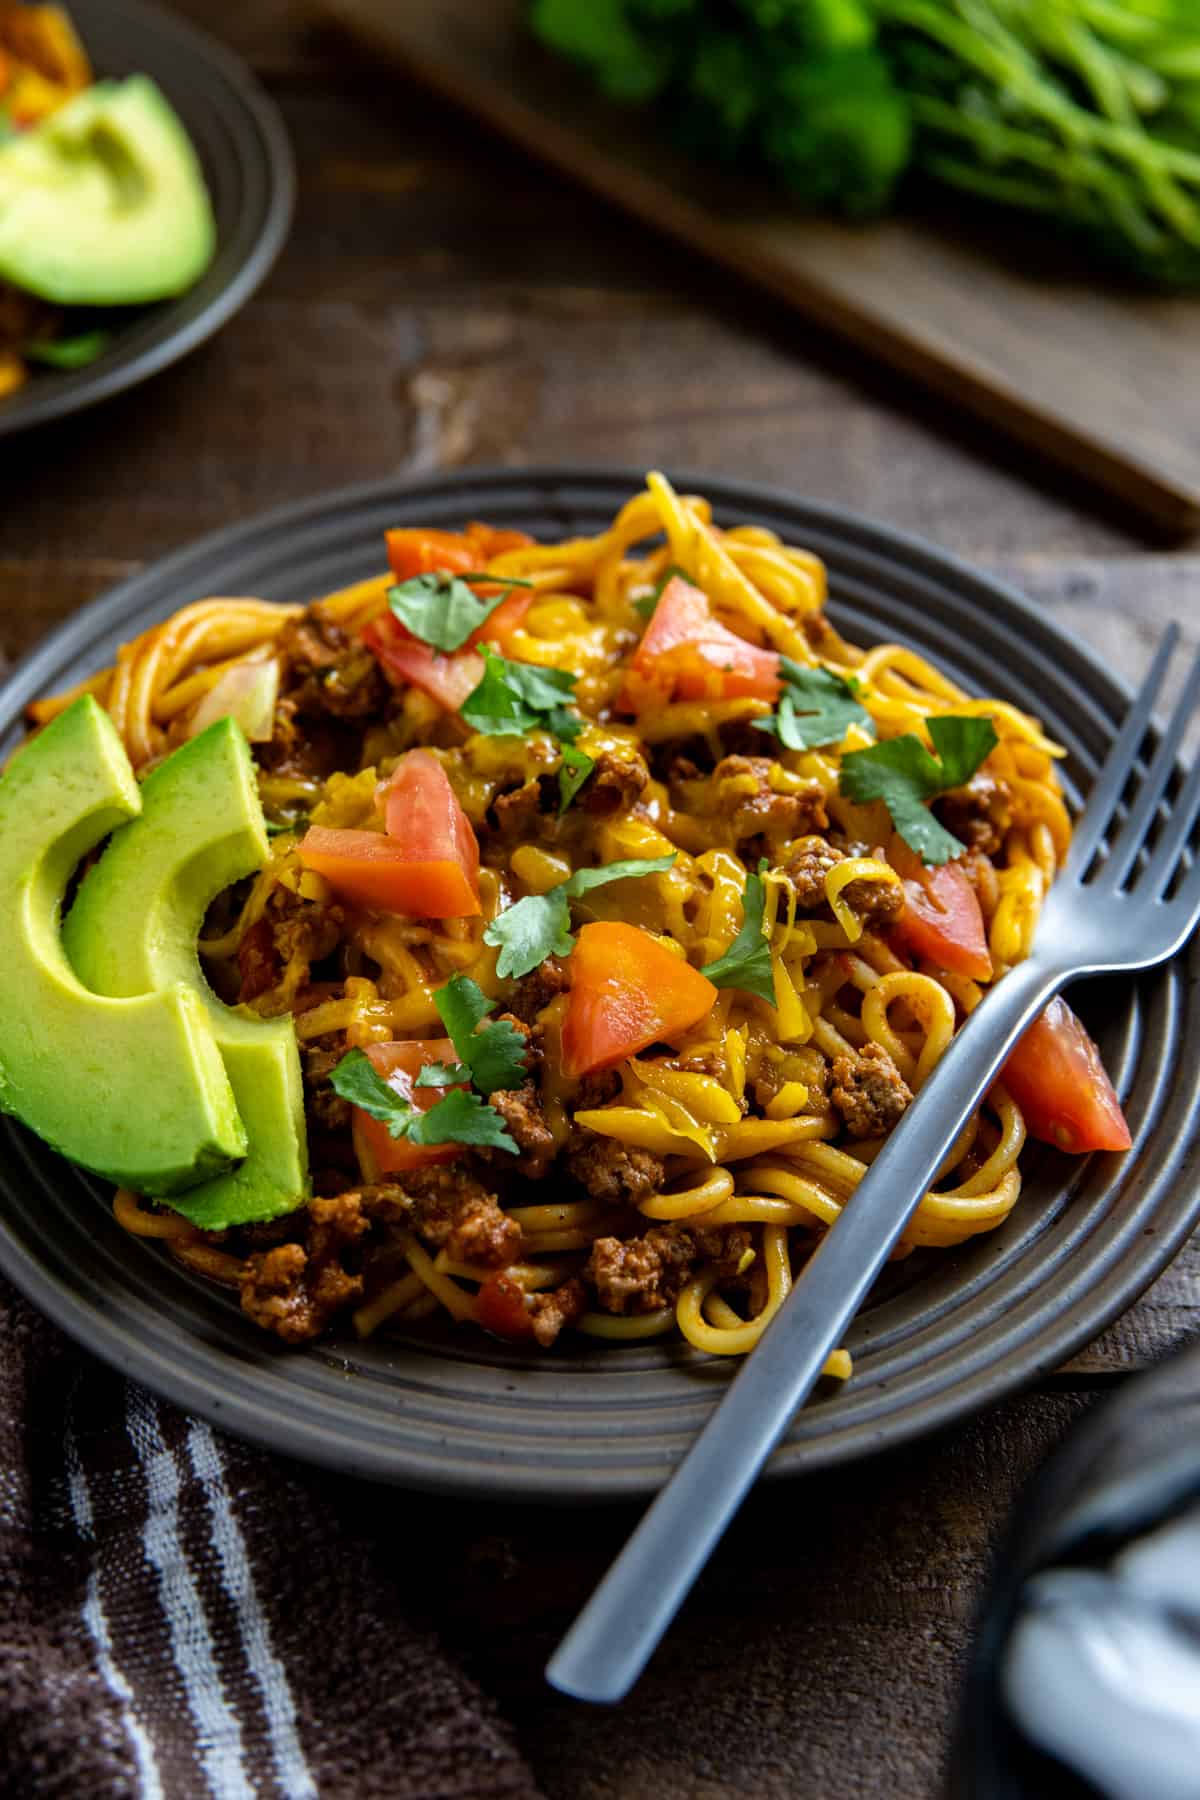 Mexican spaghetti topped with chopped tomatoes and fresh cilantro on brown plate with fork on the side.  Avocado slices on the side.